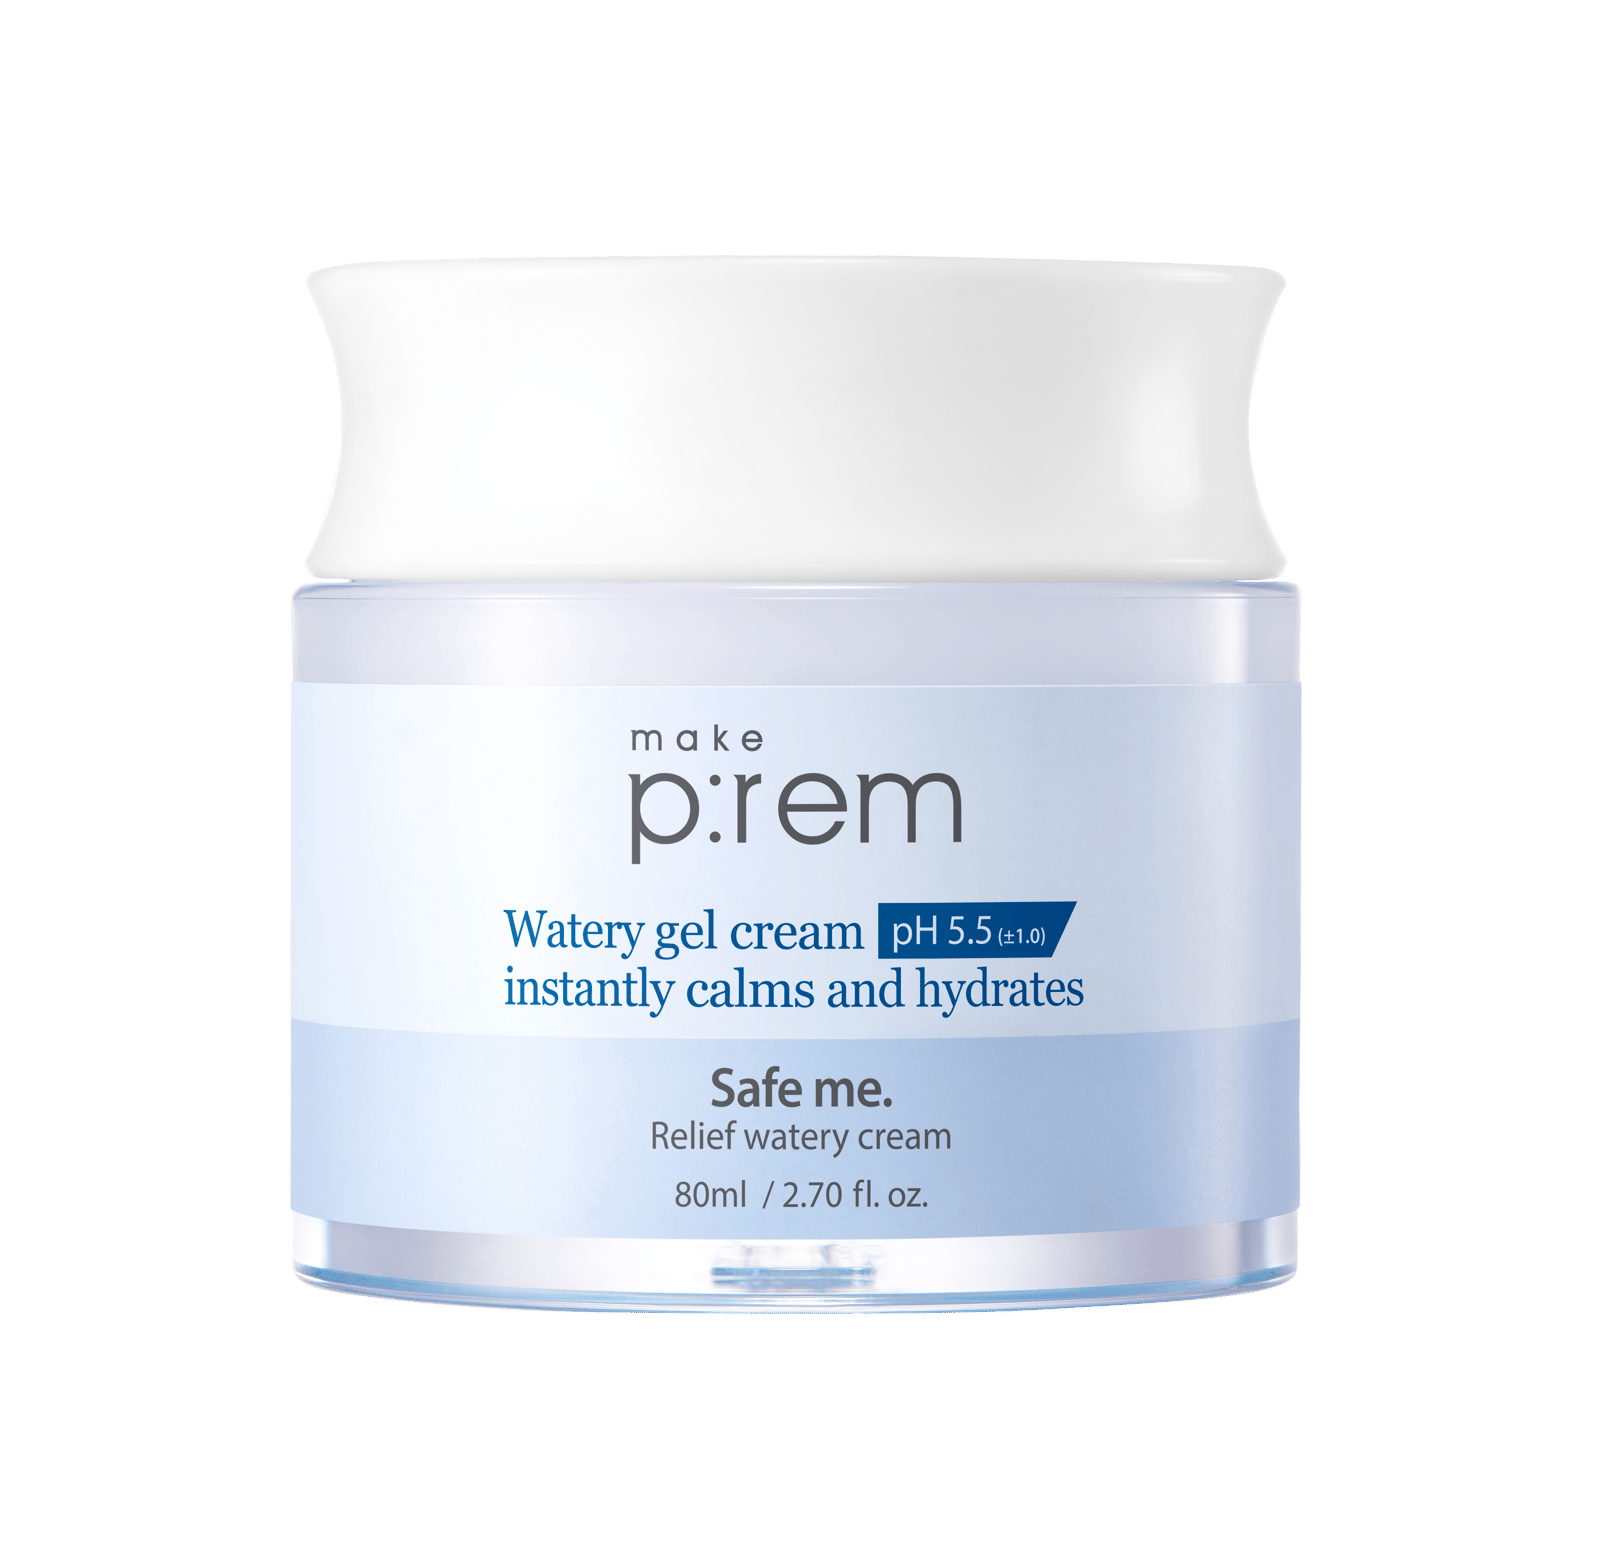 Make p:rem Safe me. Relief watery cream